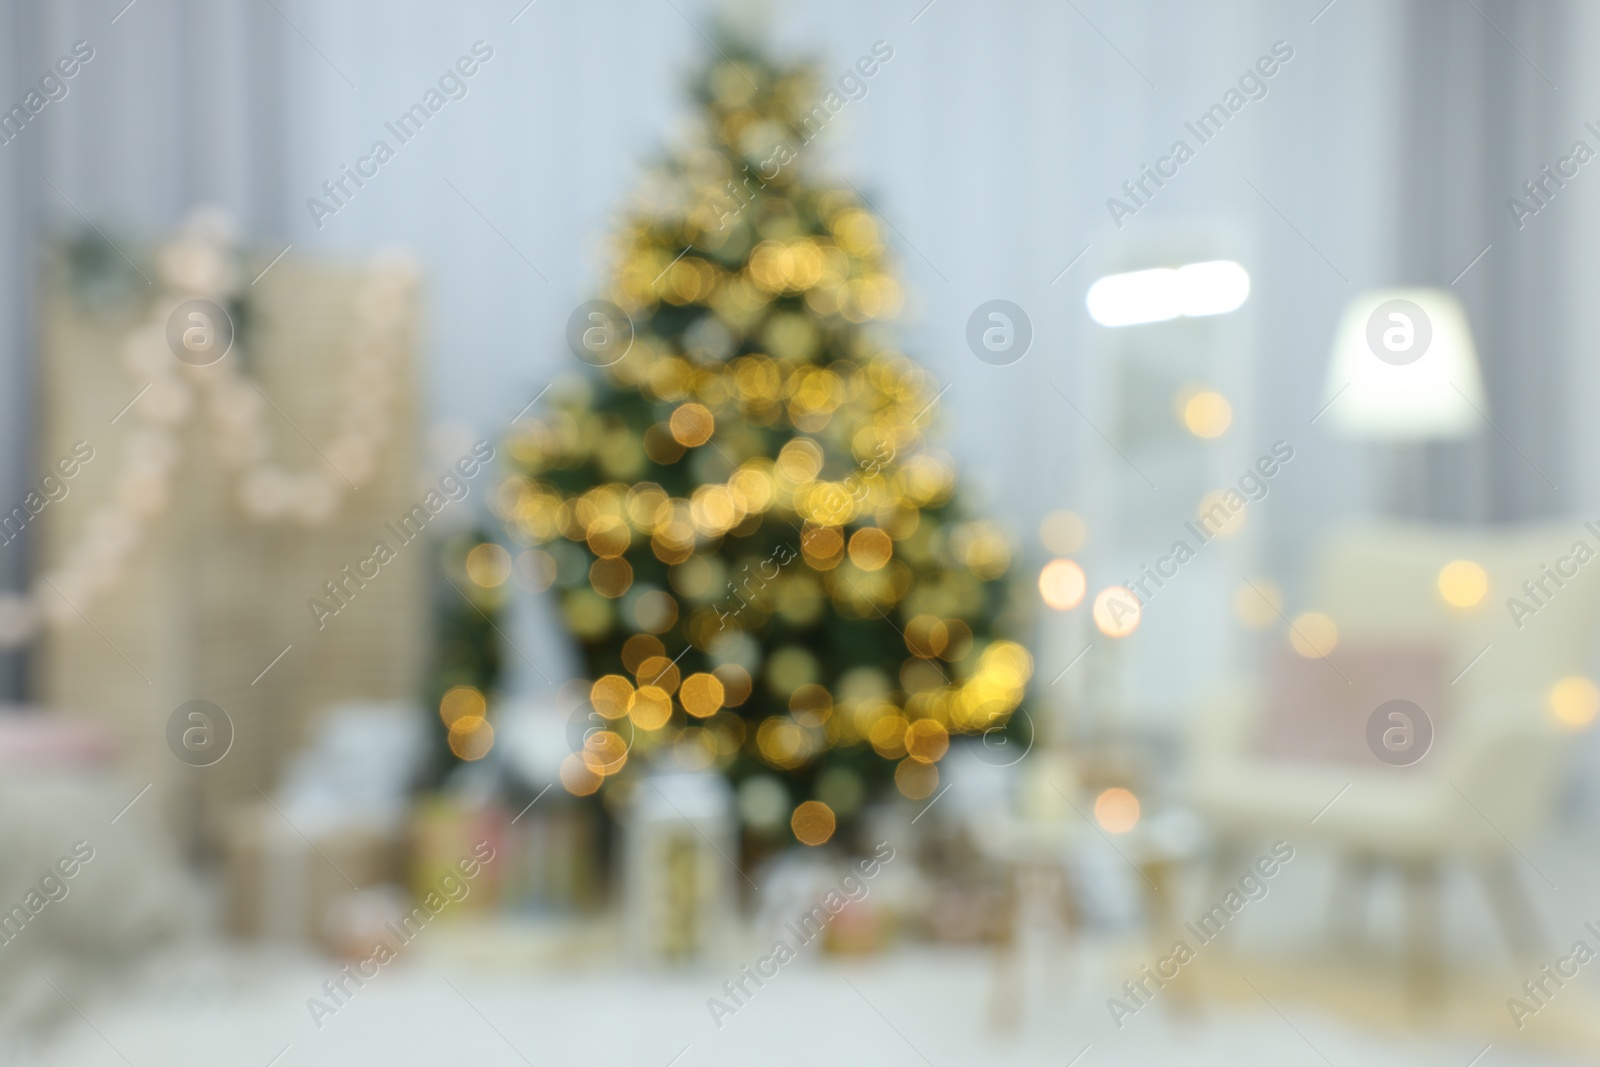 Photo of Blurred view of Christmas tree and festive decor in room. Interior design